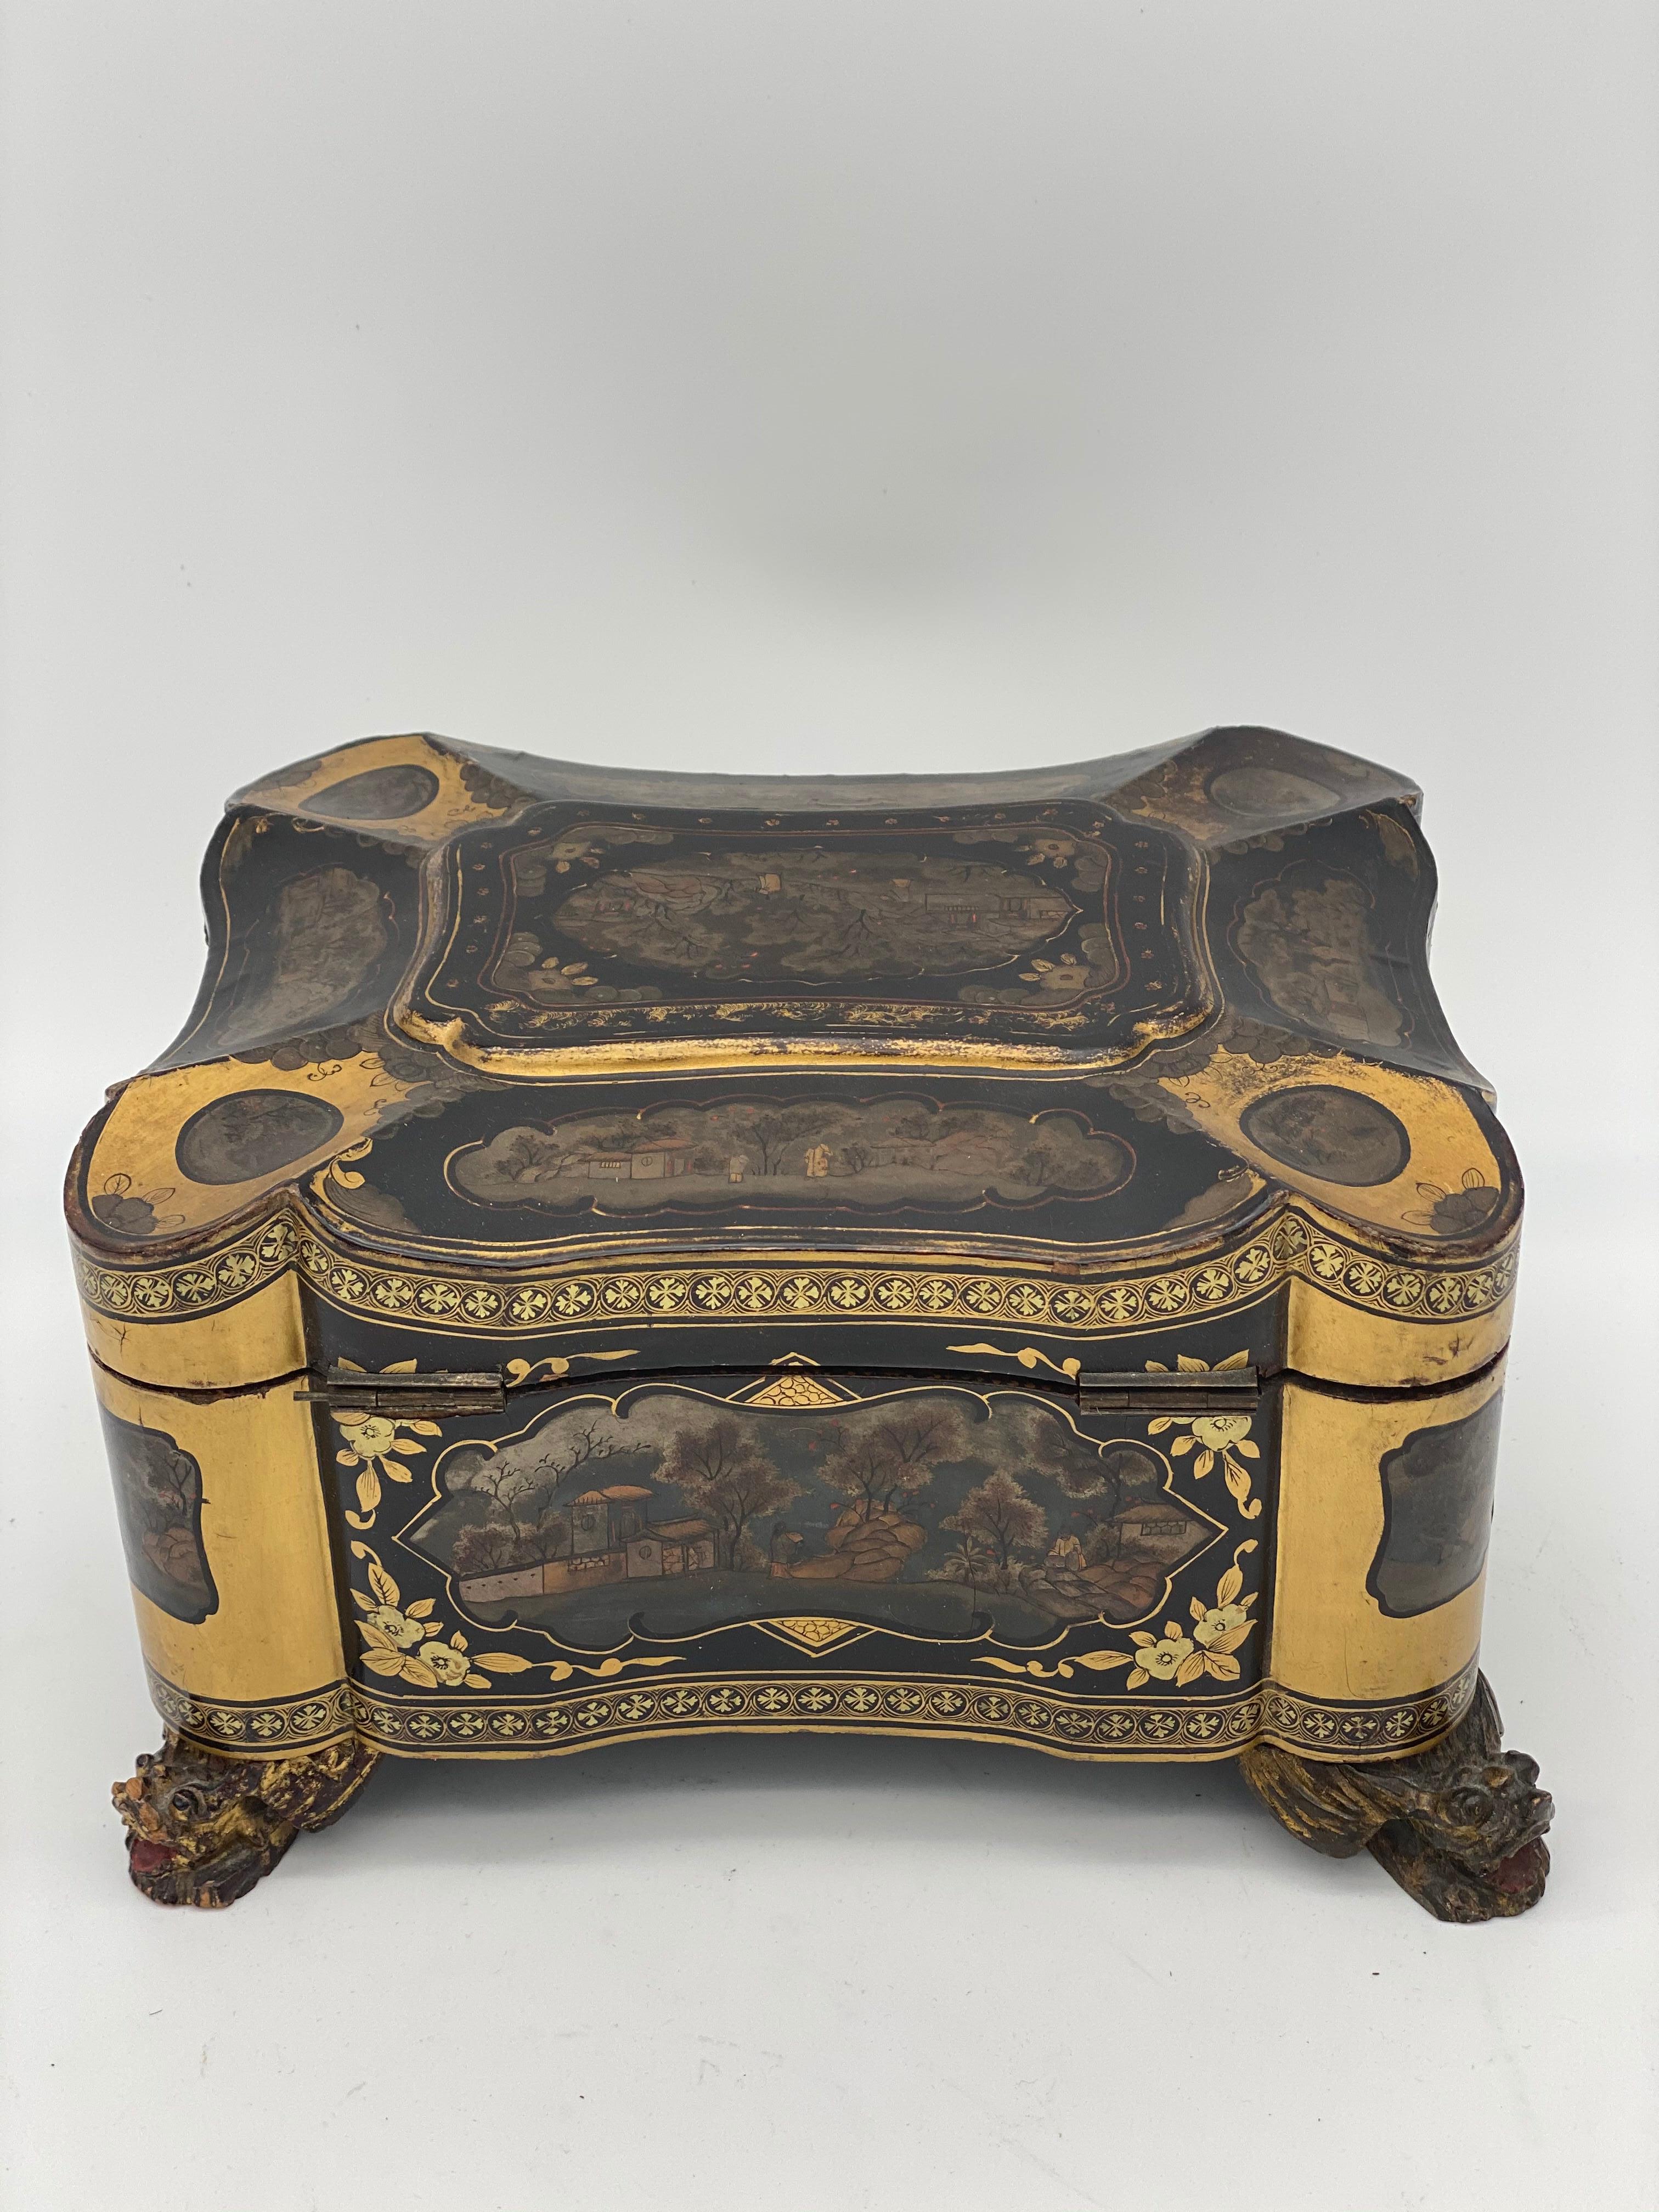 19th Century Gilt Lacquer Chinese Tea Caddy For Sale 4